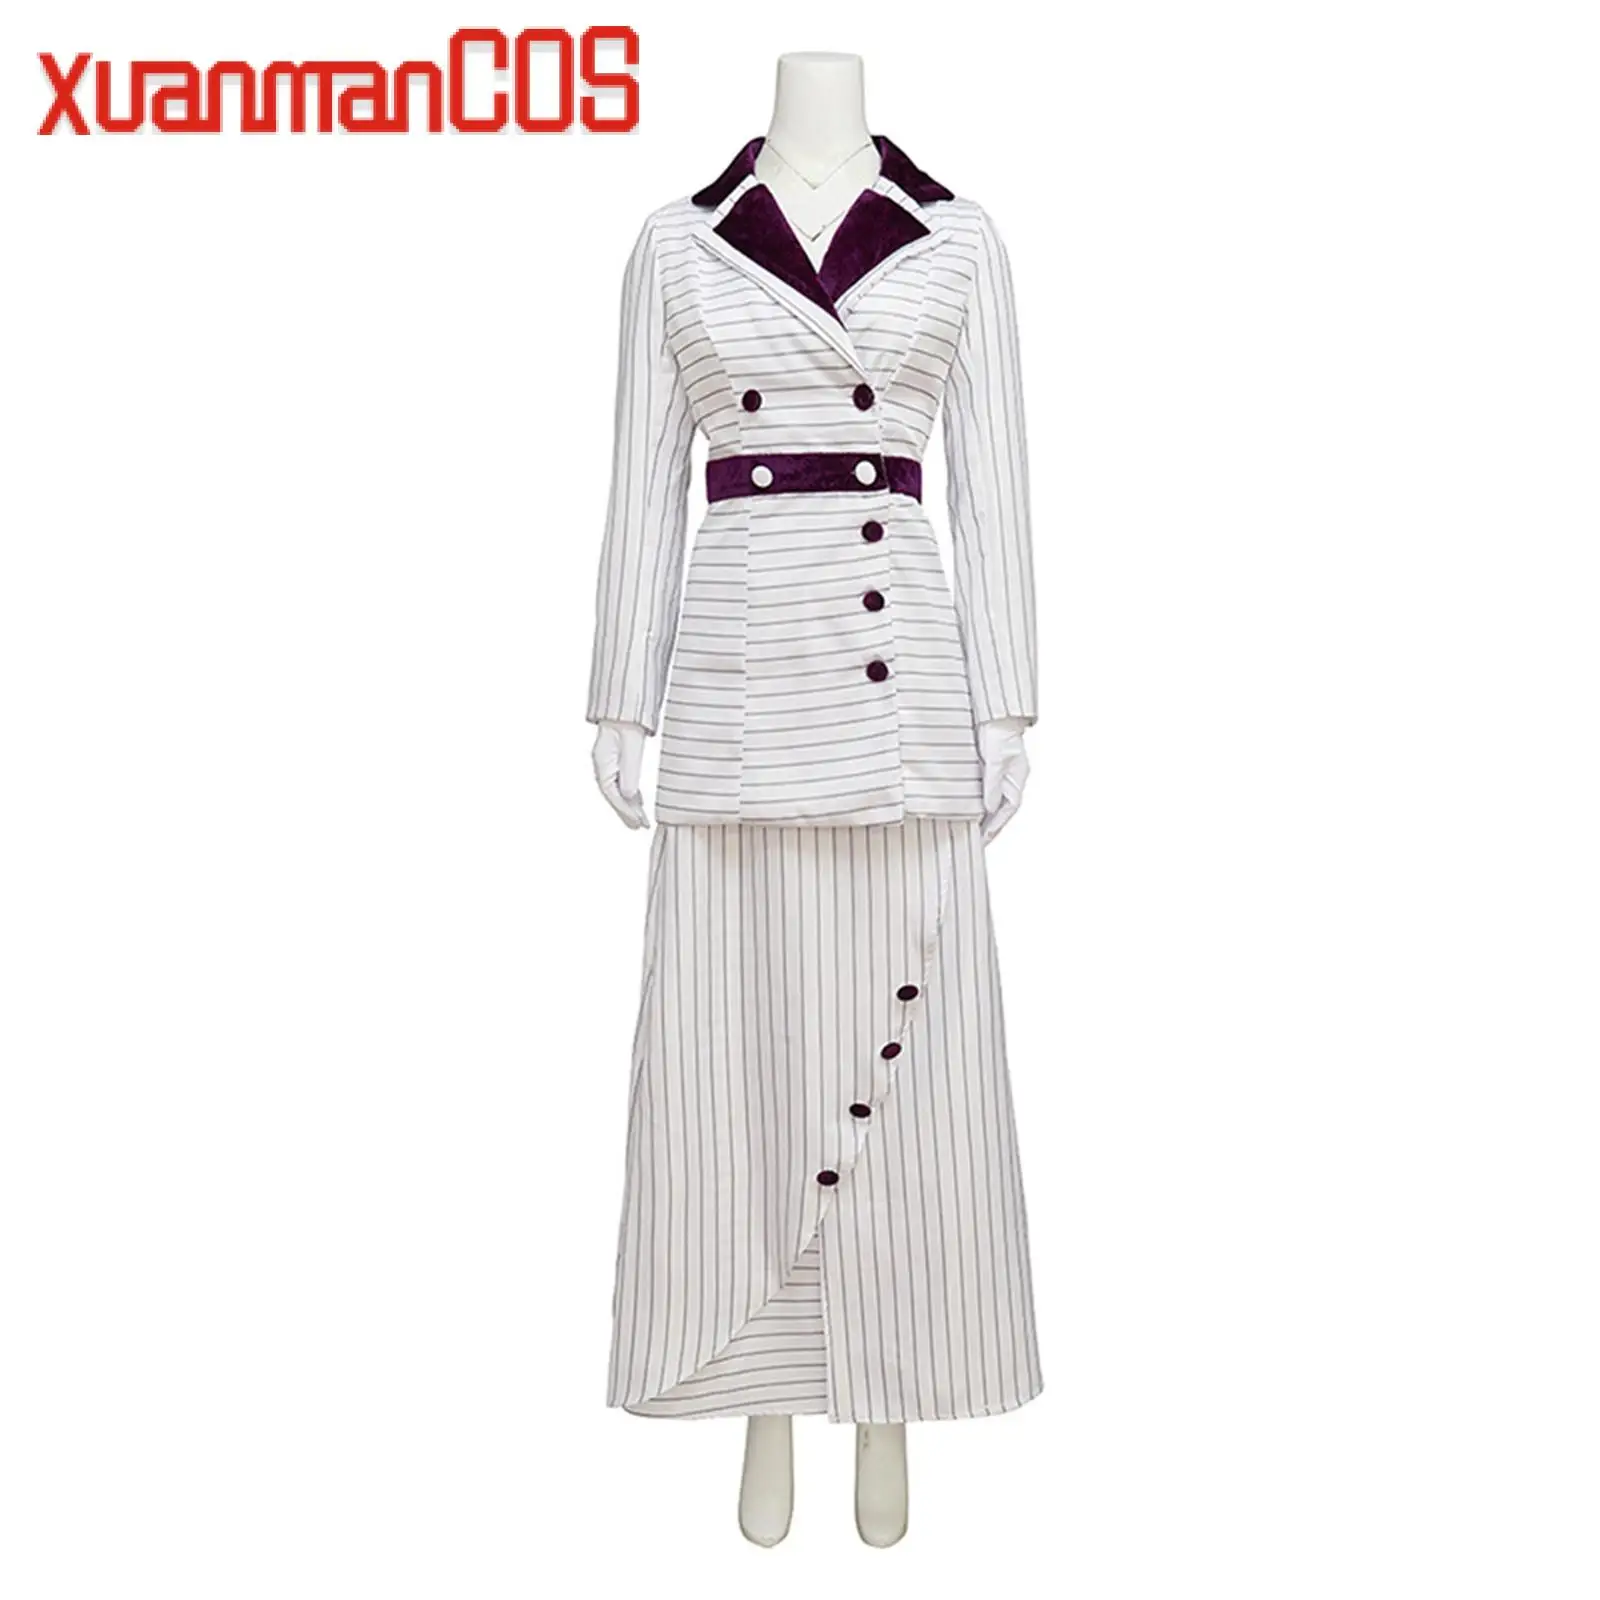 

Movie Rose Cosplay Costume Uniform Top Skirt White Stripes Women Girl Performance Clothing Outfit Halloween Party Carnival Suit